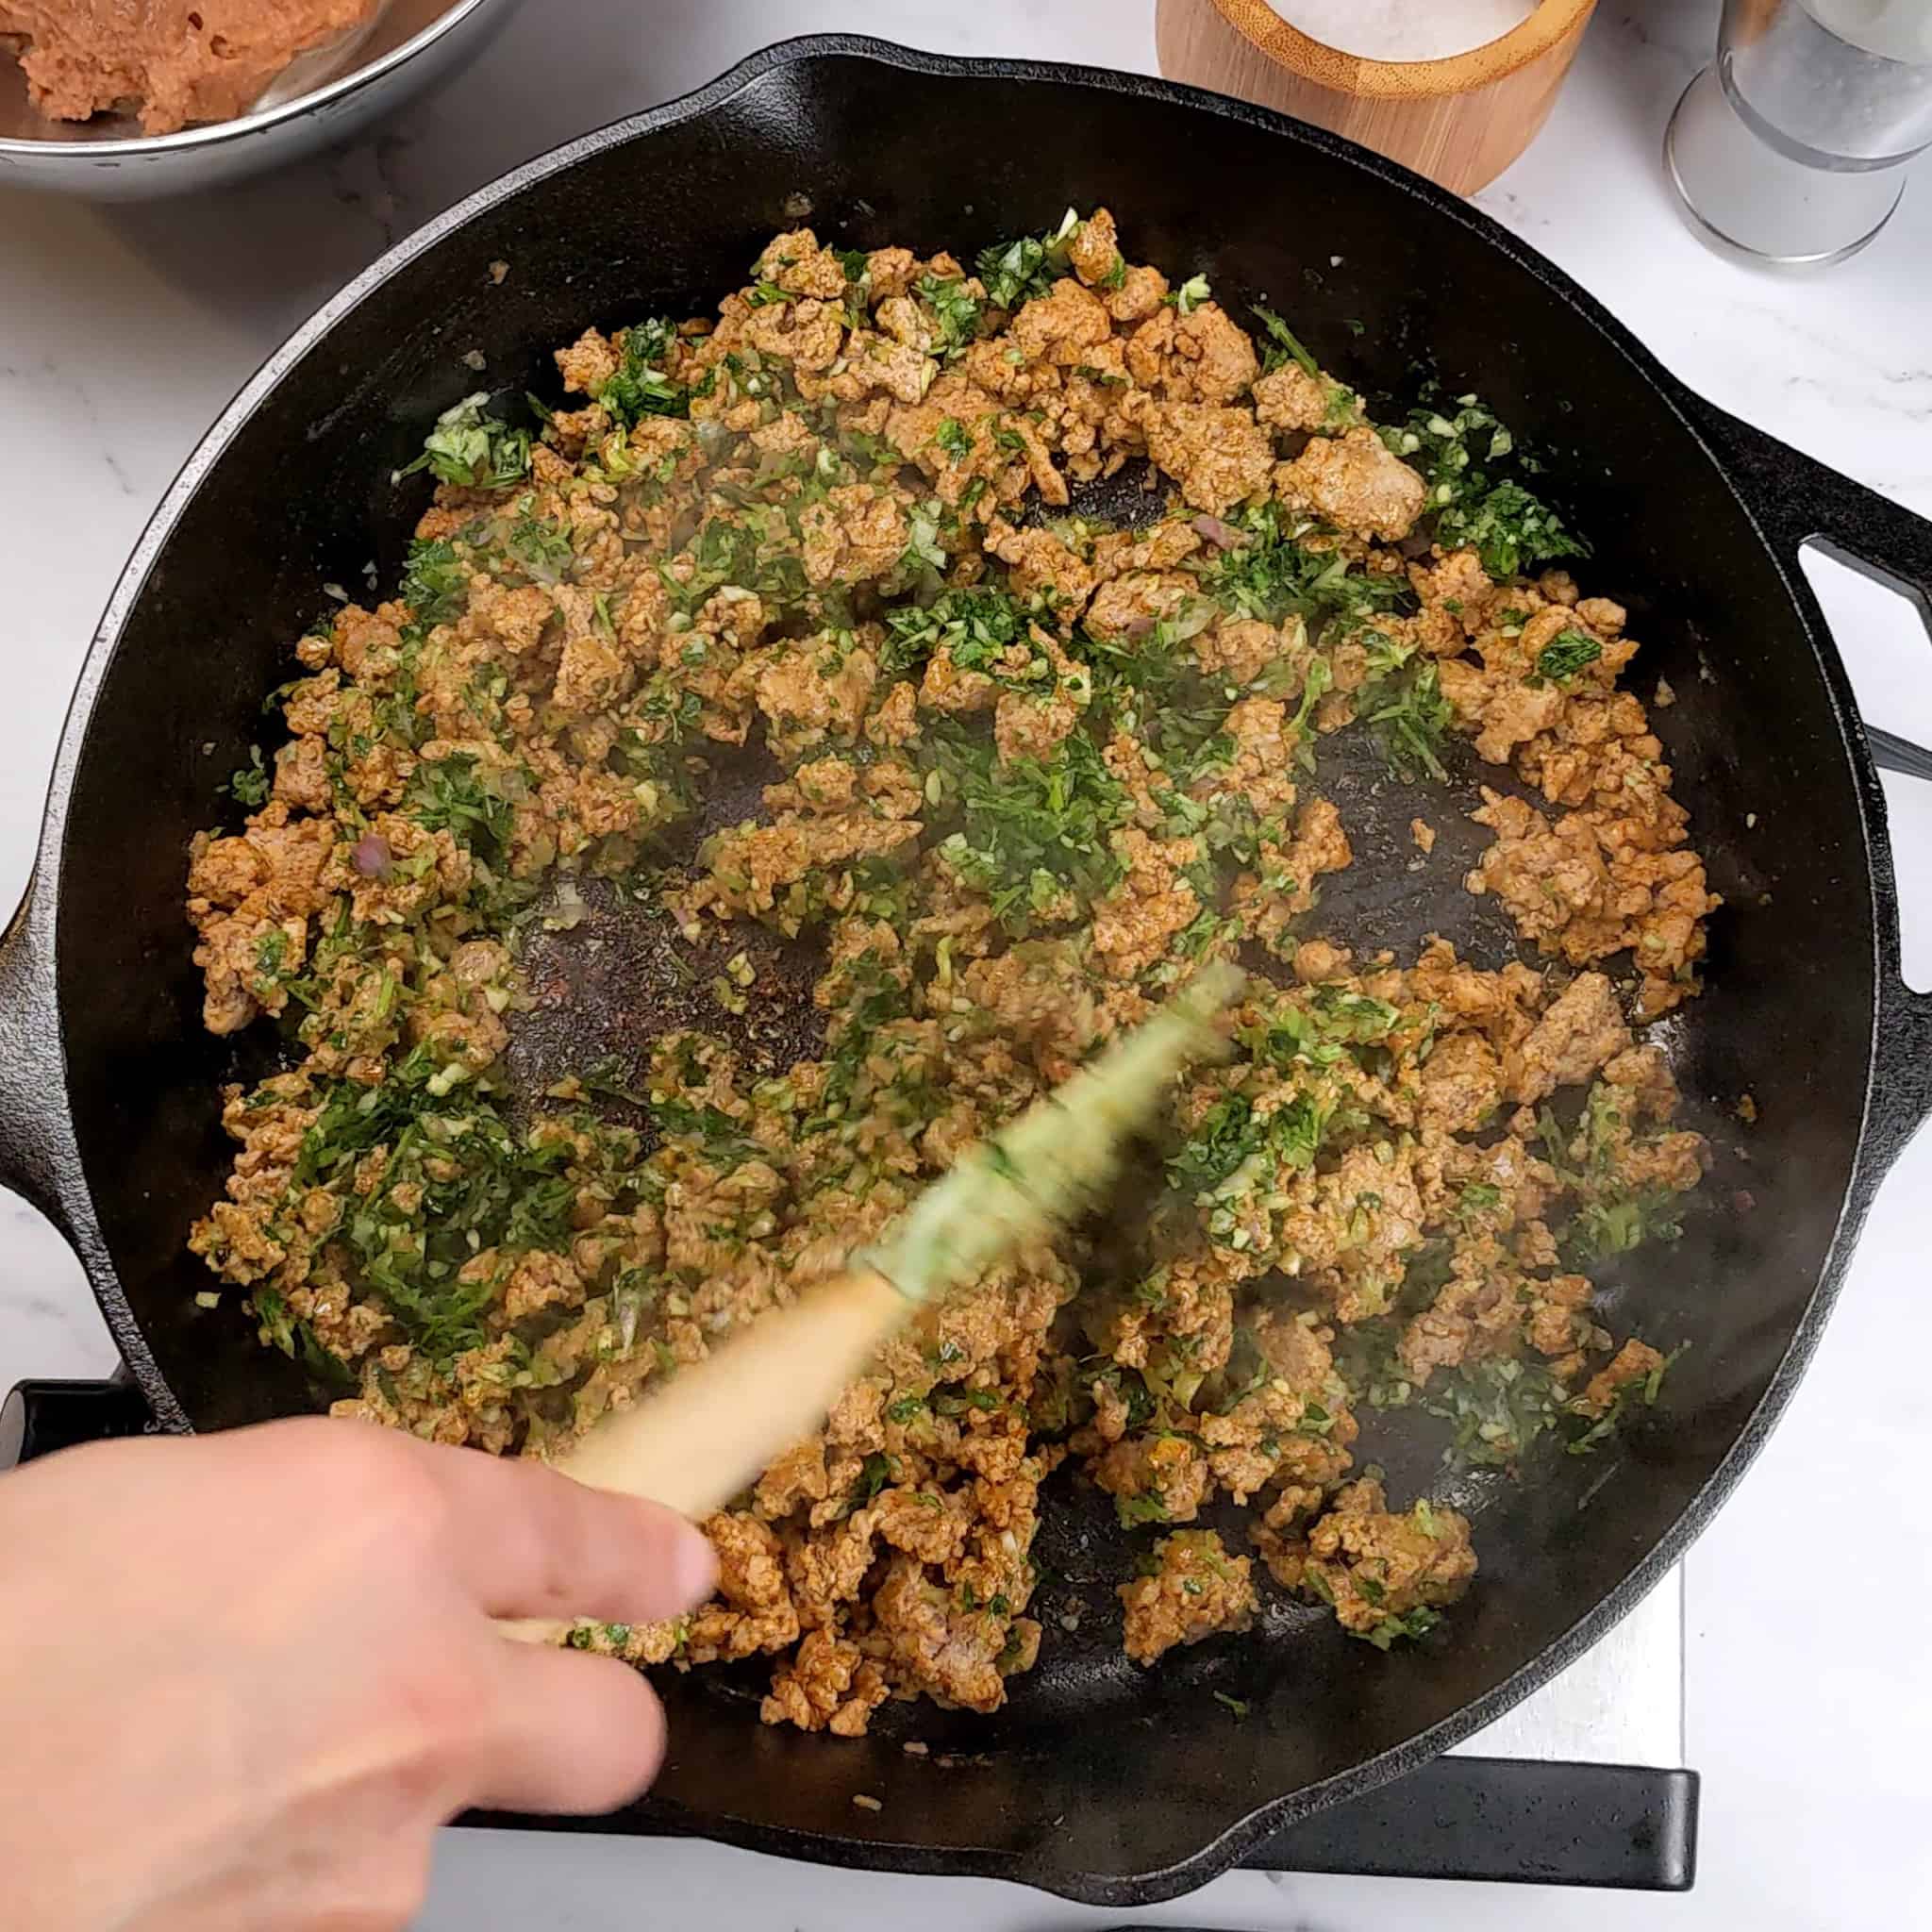 aromatic paste of chopped cilantro, shallots and garlic being mixed into cooked crumbled ground turkey in a cast iron skillet with a silicone spatula.